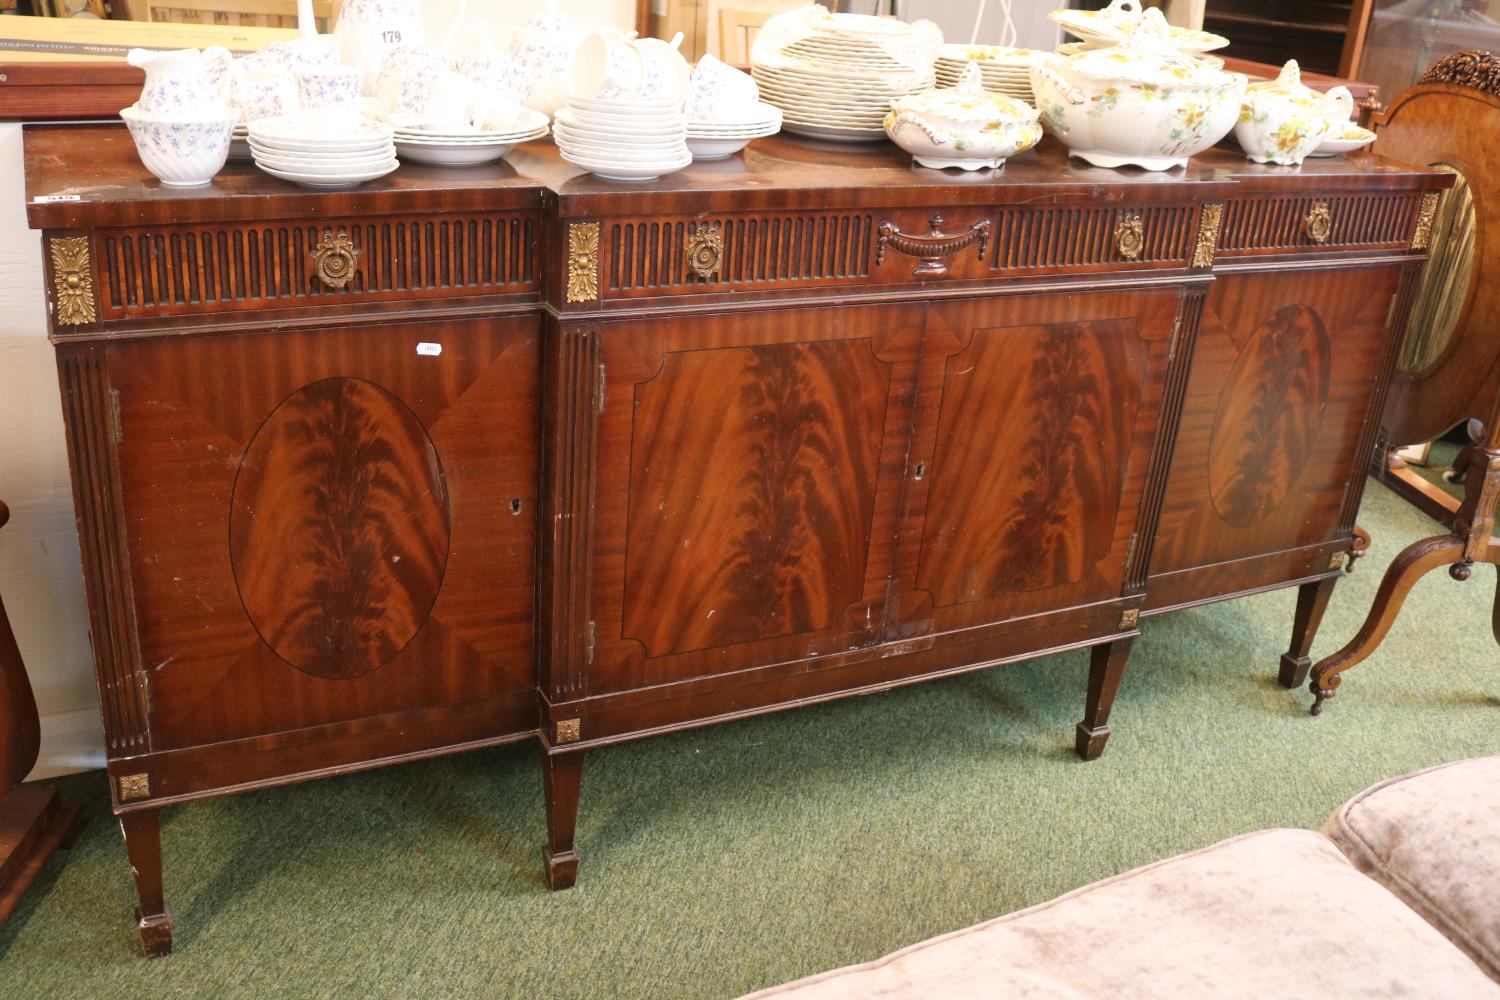 Reproduction Breakfront Walnut veneered sideboard with applied gilded decoration and brass drop